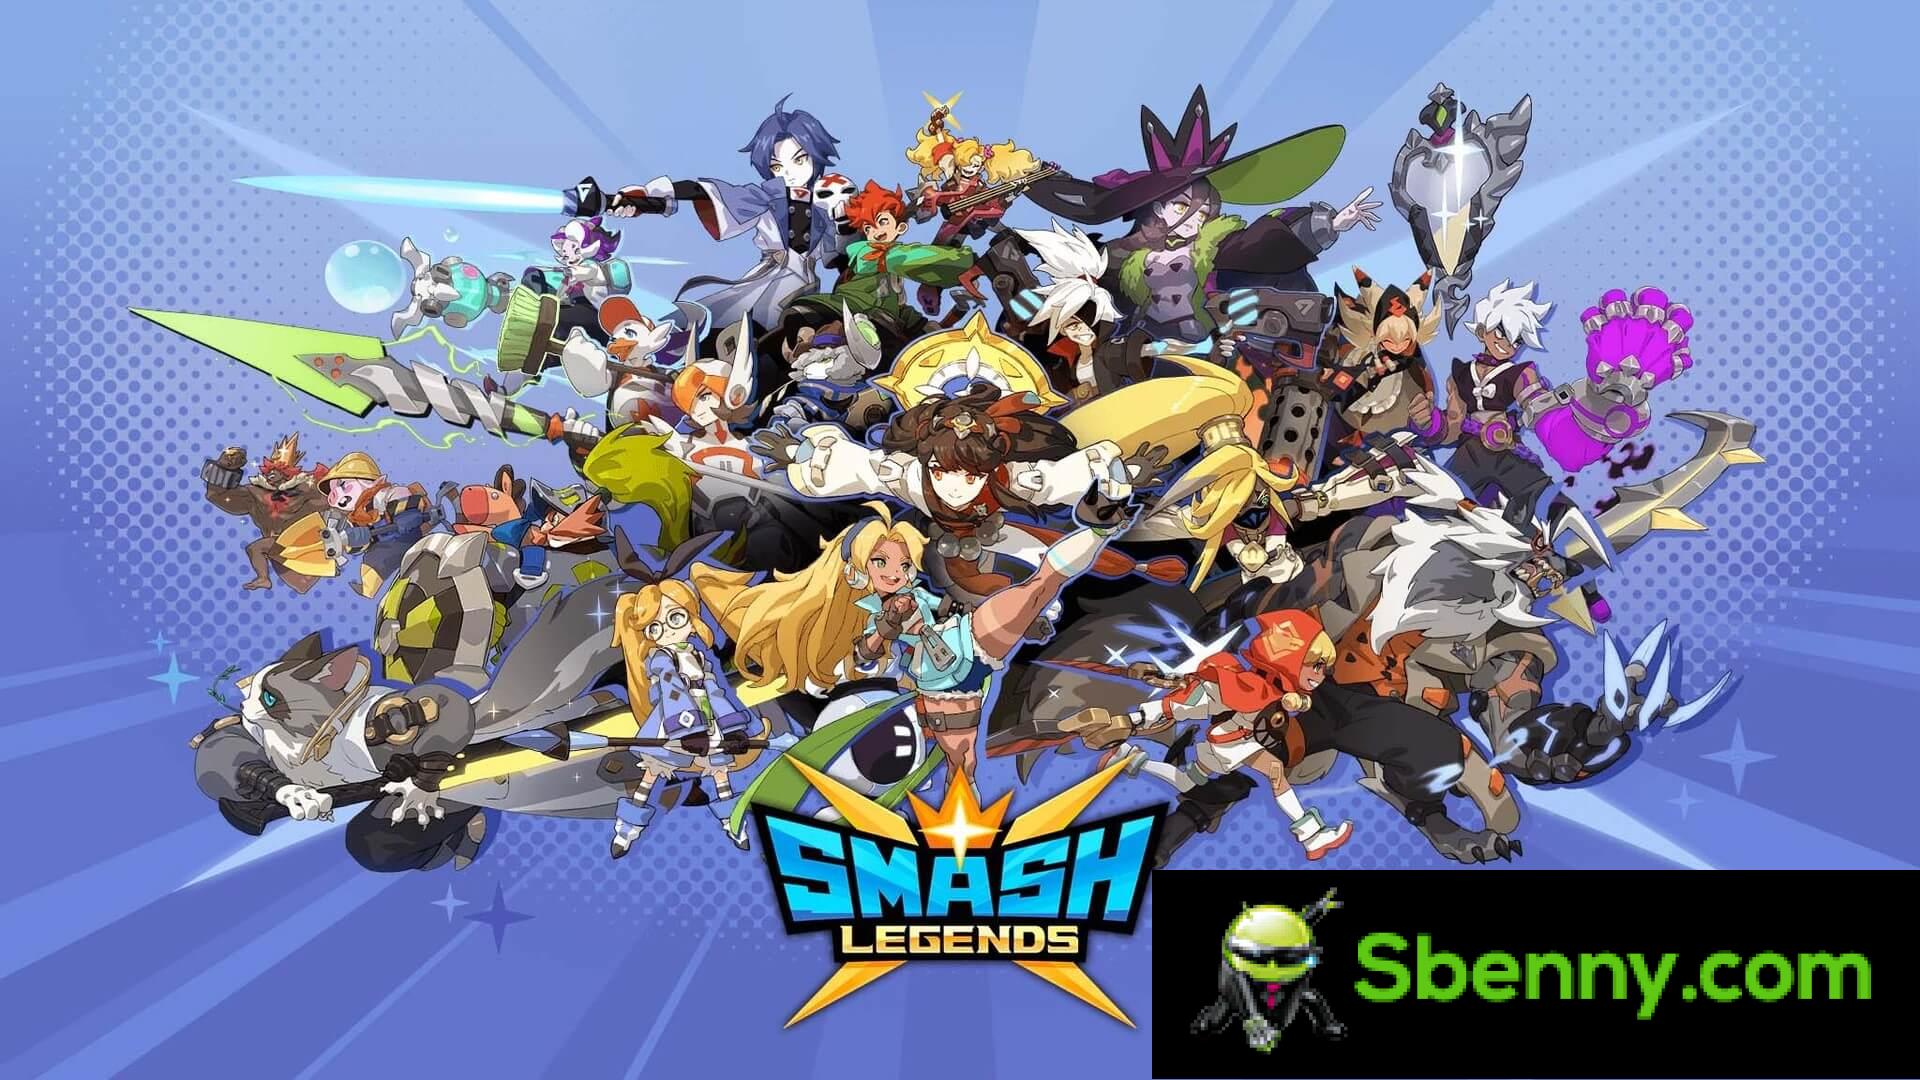 SMASH LEGENDS Heroes Guide: The best heroes in the game